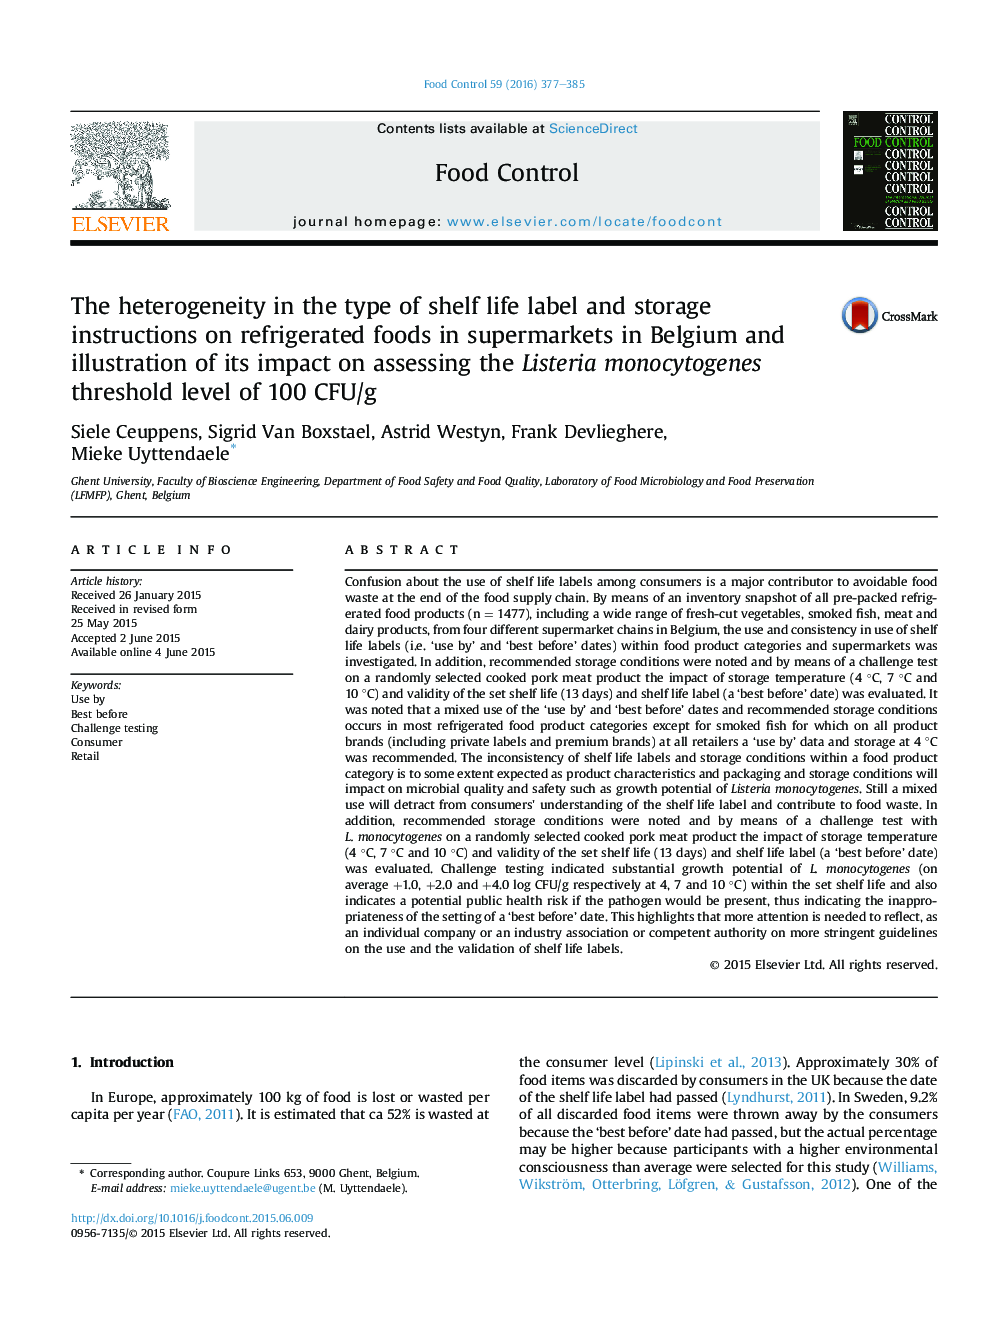 The heterogeneity in the type of shelf life label and storage instructions on refrigerated foods in supermarkets in Belgium and illustration of its impact on assessing the Listeria monocytogenes threshold level of 100Â CFU/g